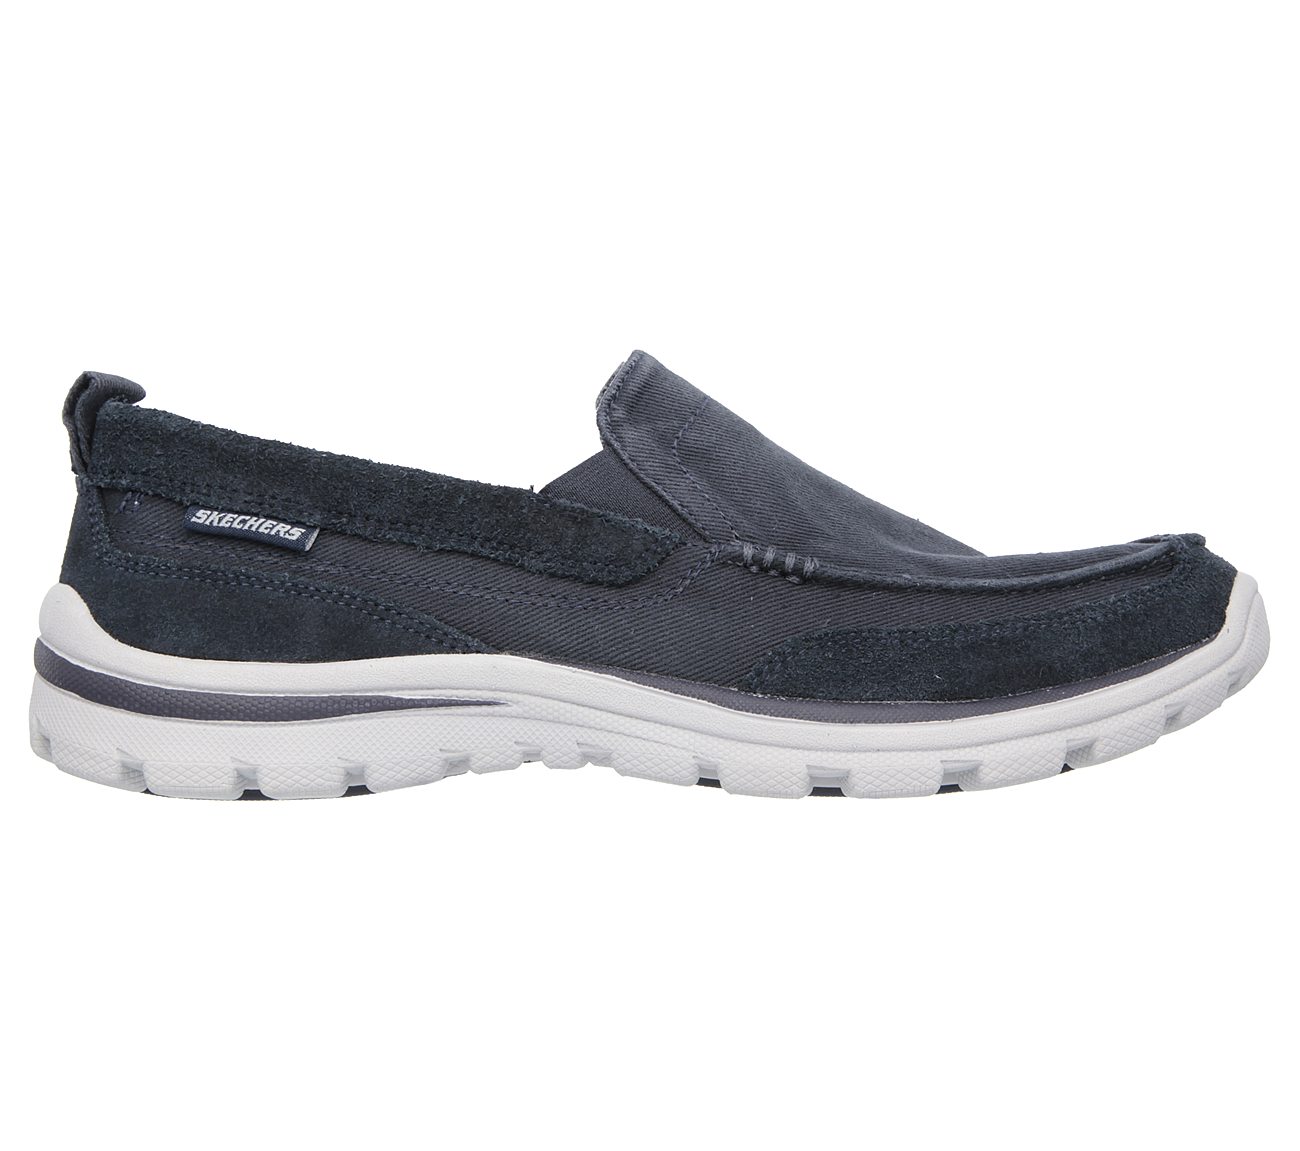 Buy SKECHERS Relaxed Fit: Superior - Melvin Modern Comfort Shoes